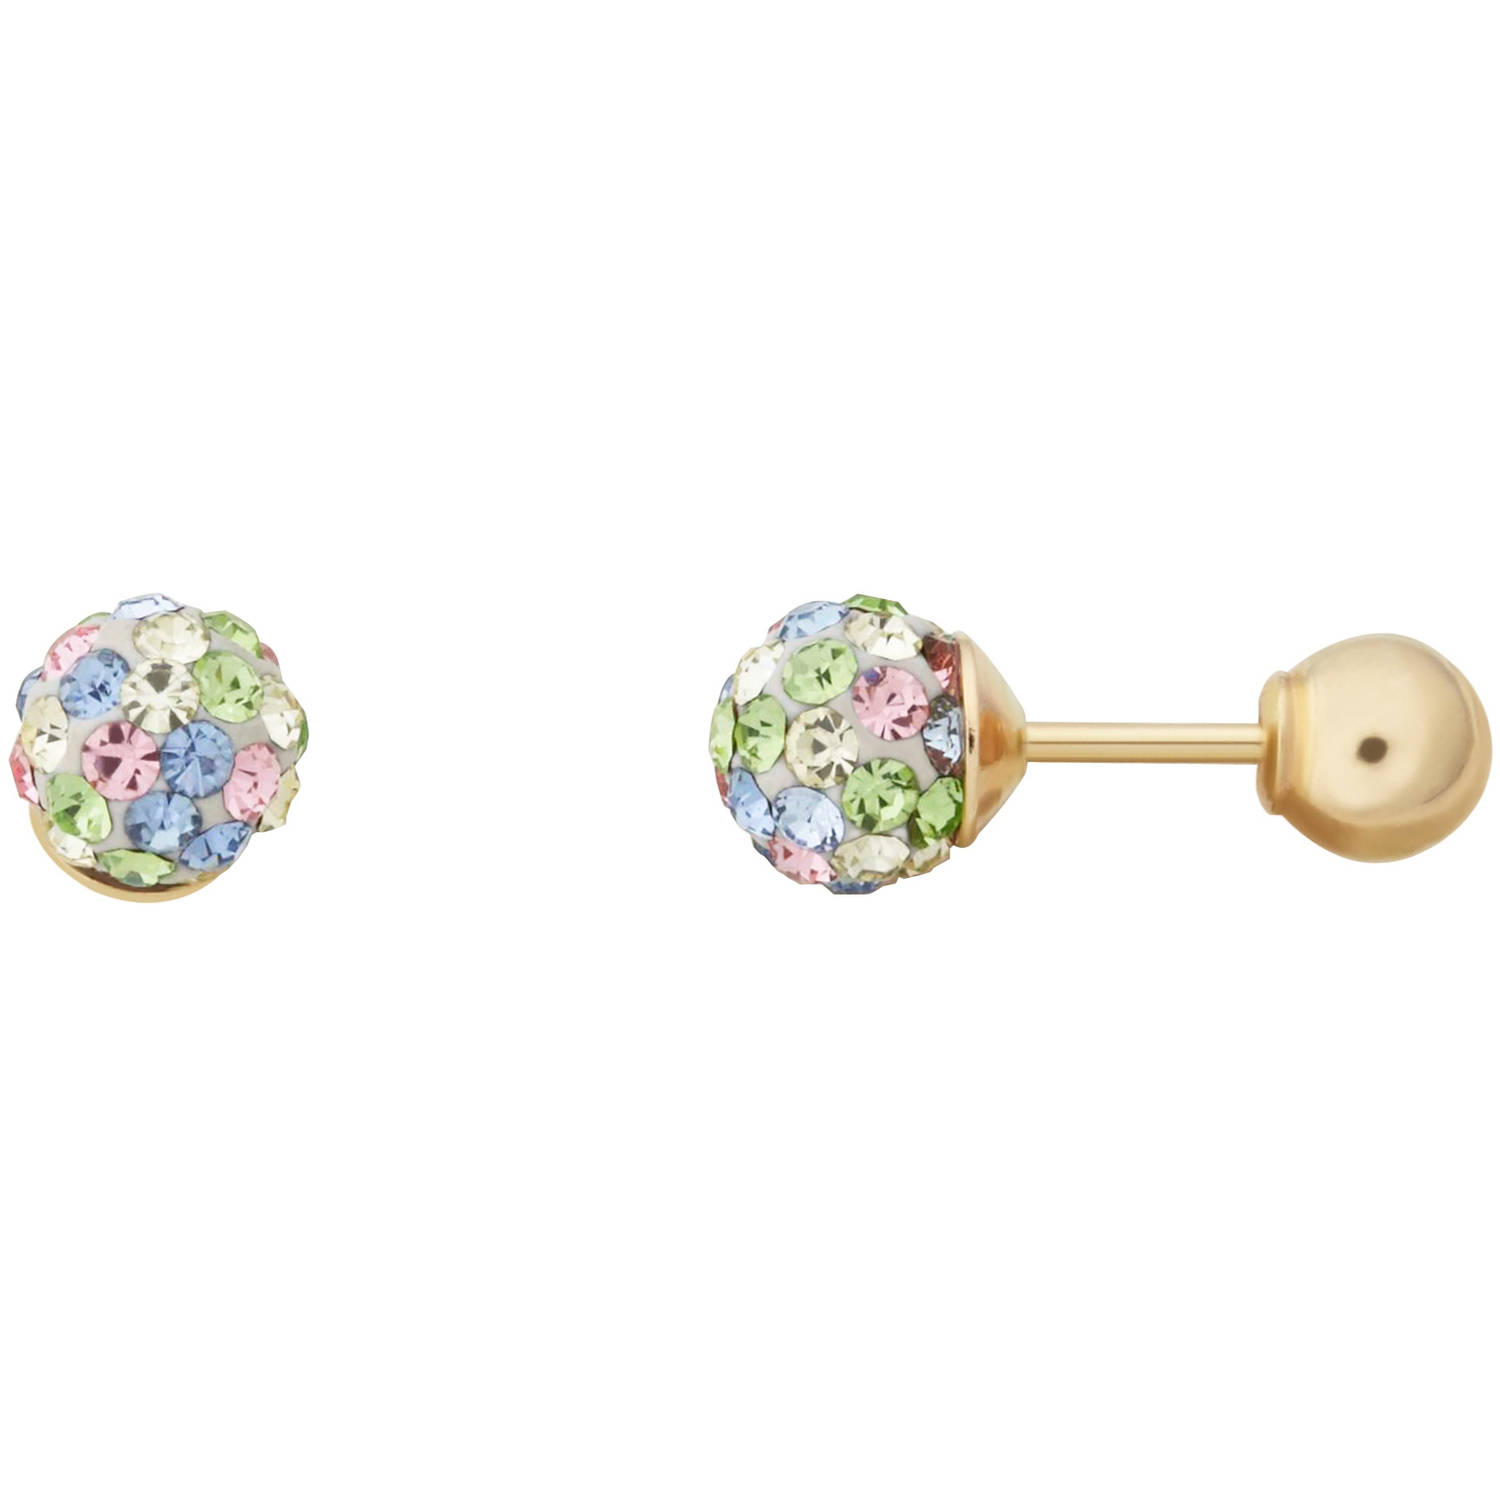 Brilliance Fine Jewelry Girls' Pastel Crystals 4.8MM Ball Earrings in 10K Yellow Gold - image 1 of 4